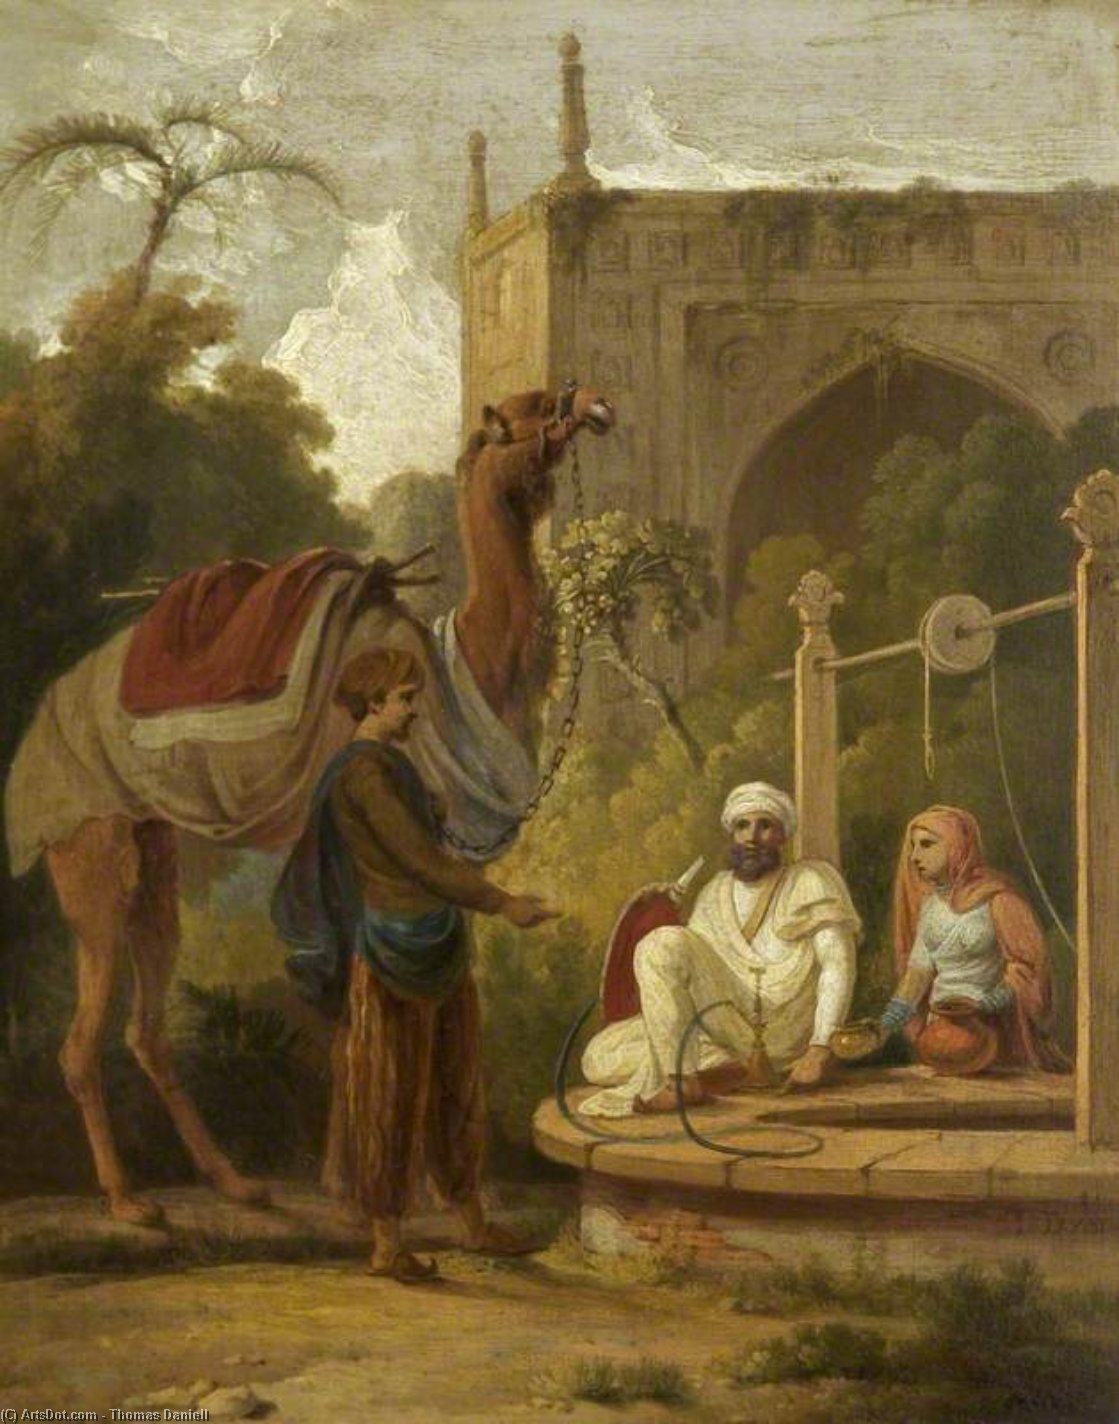 Buy Museum Art Reproductions Indian Scene - Figures And A Camel At A Well by Thomas Daniell (1749-1840) | ArtsDot.com